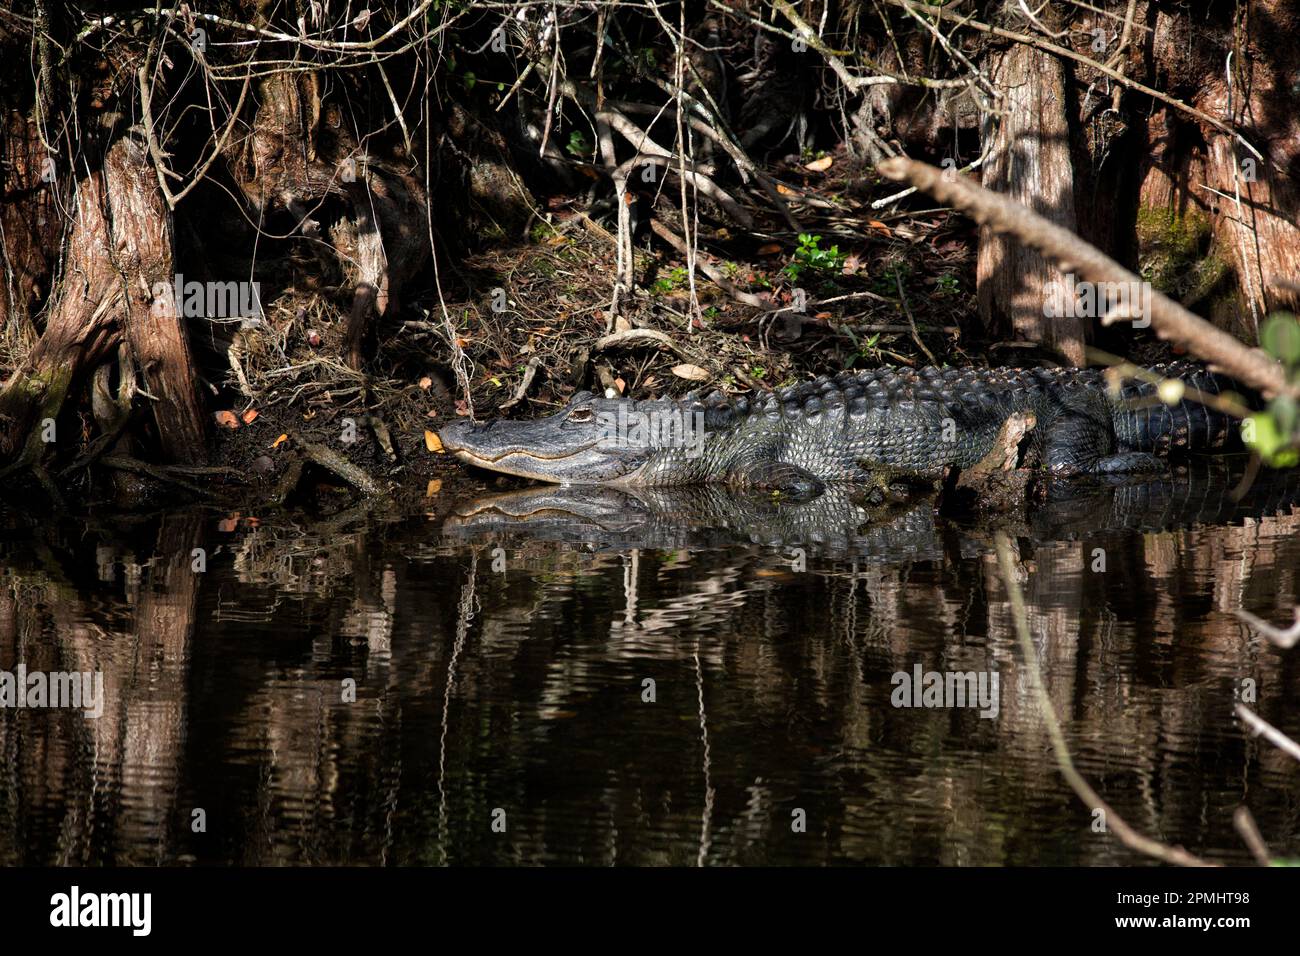 Amerian alligator sunning in sunlit shadows of Big Cypress Preserve, Florida. The big lizard imbues a Primitive Primorial essence to the swamp. Stock Photo